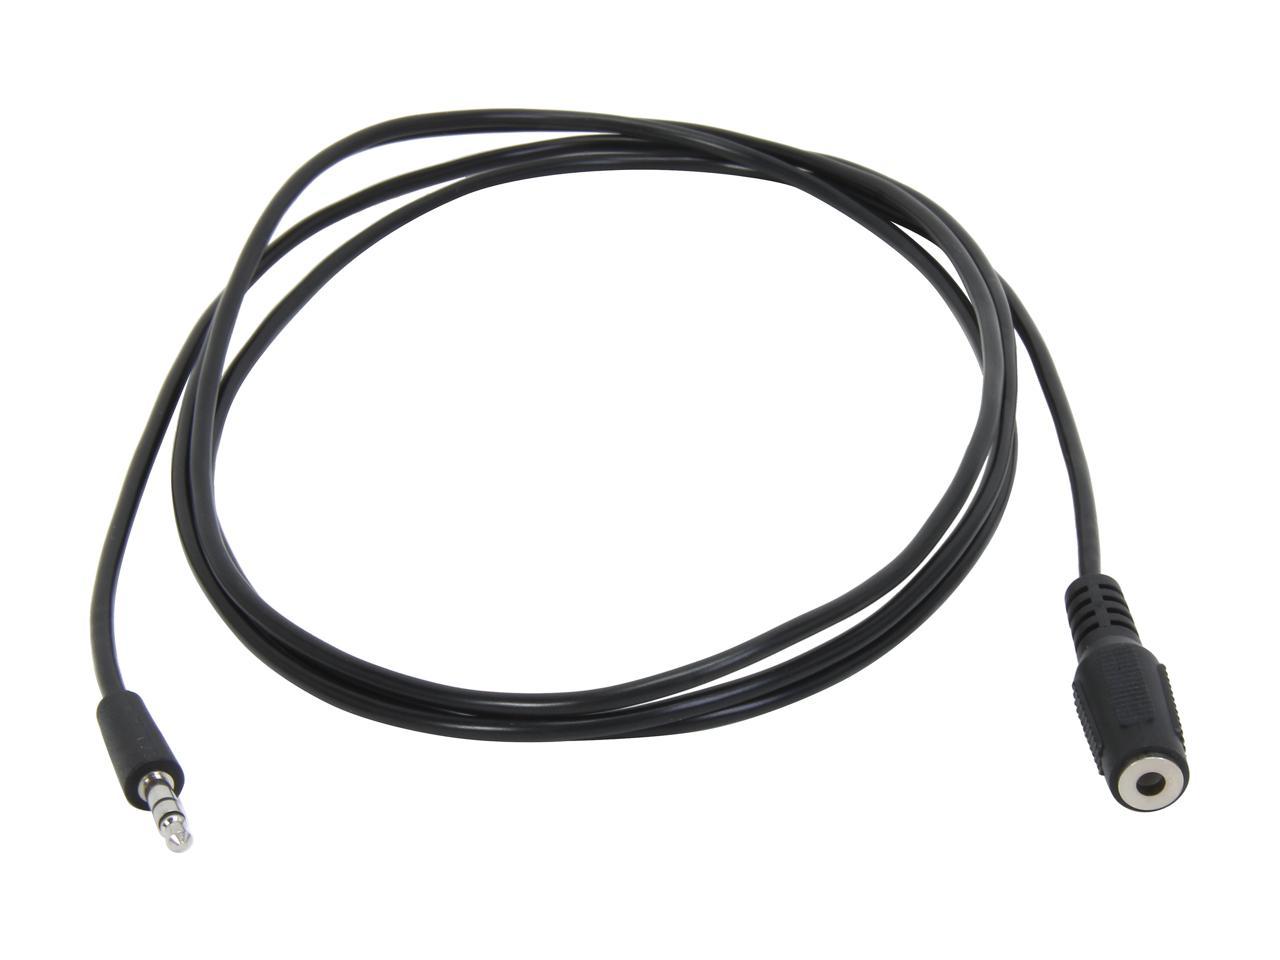 Tripp Lite P311-006 6 ft. Mini-Stereo Audio Extension Cable Male to Female - image 2 of 3